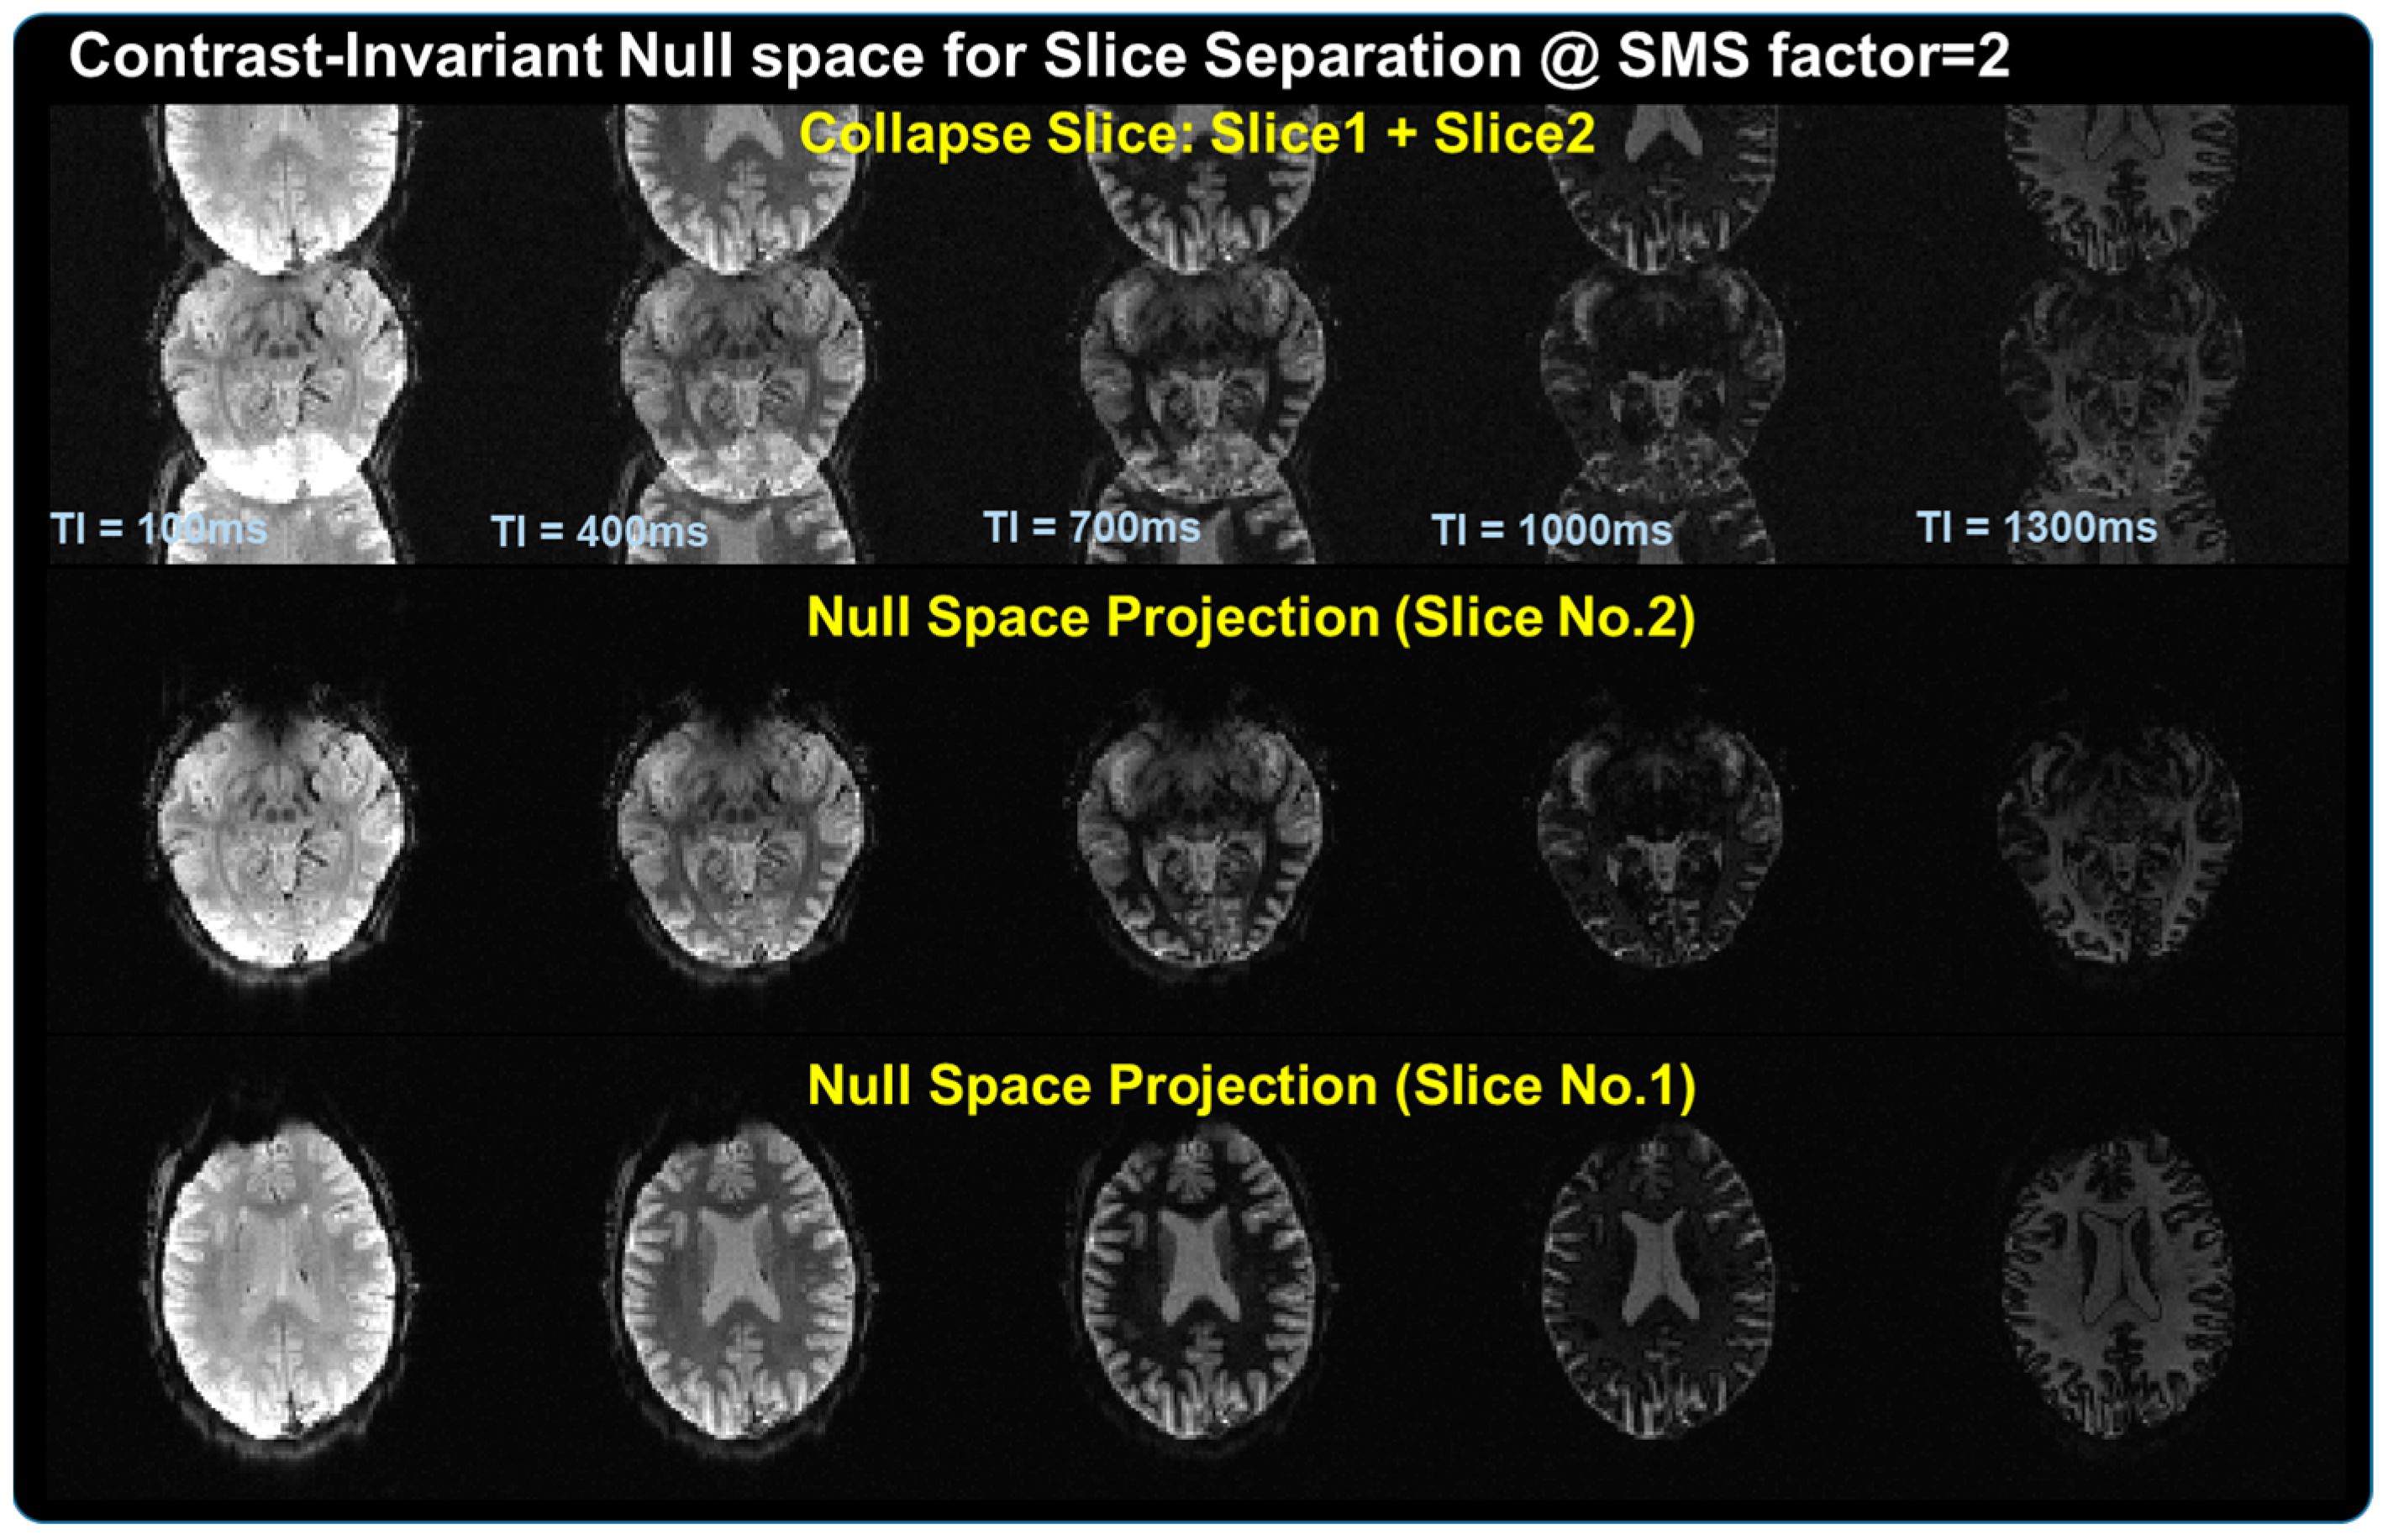 M4Raw: A multi-contrast, multi-repetition, multi-channel MRI k-space  dataset for low-field MRI research